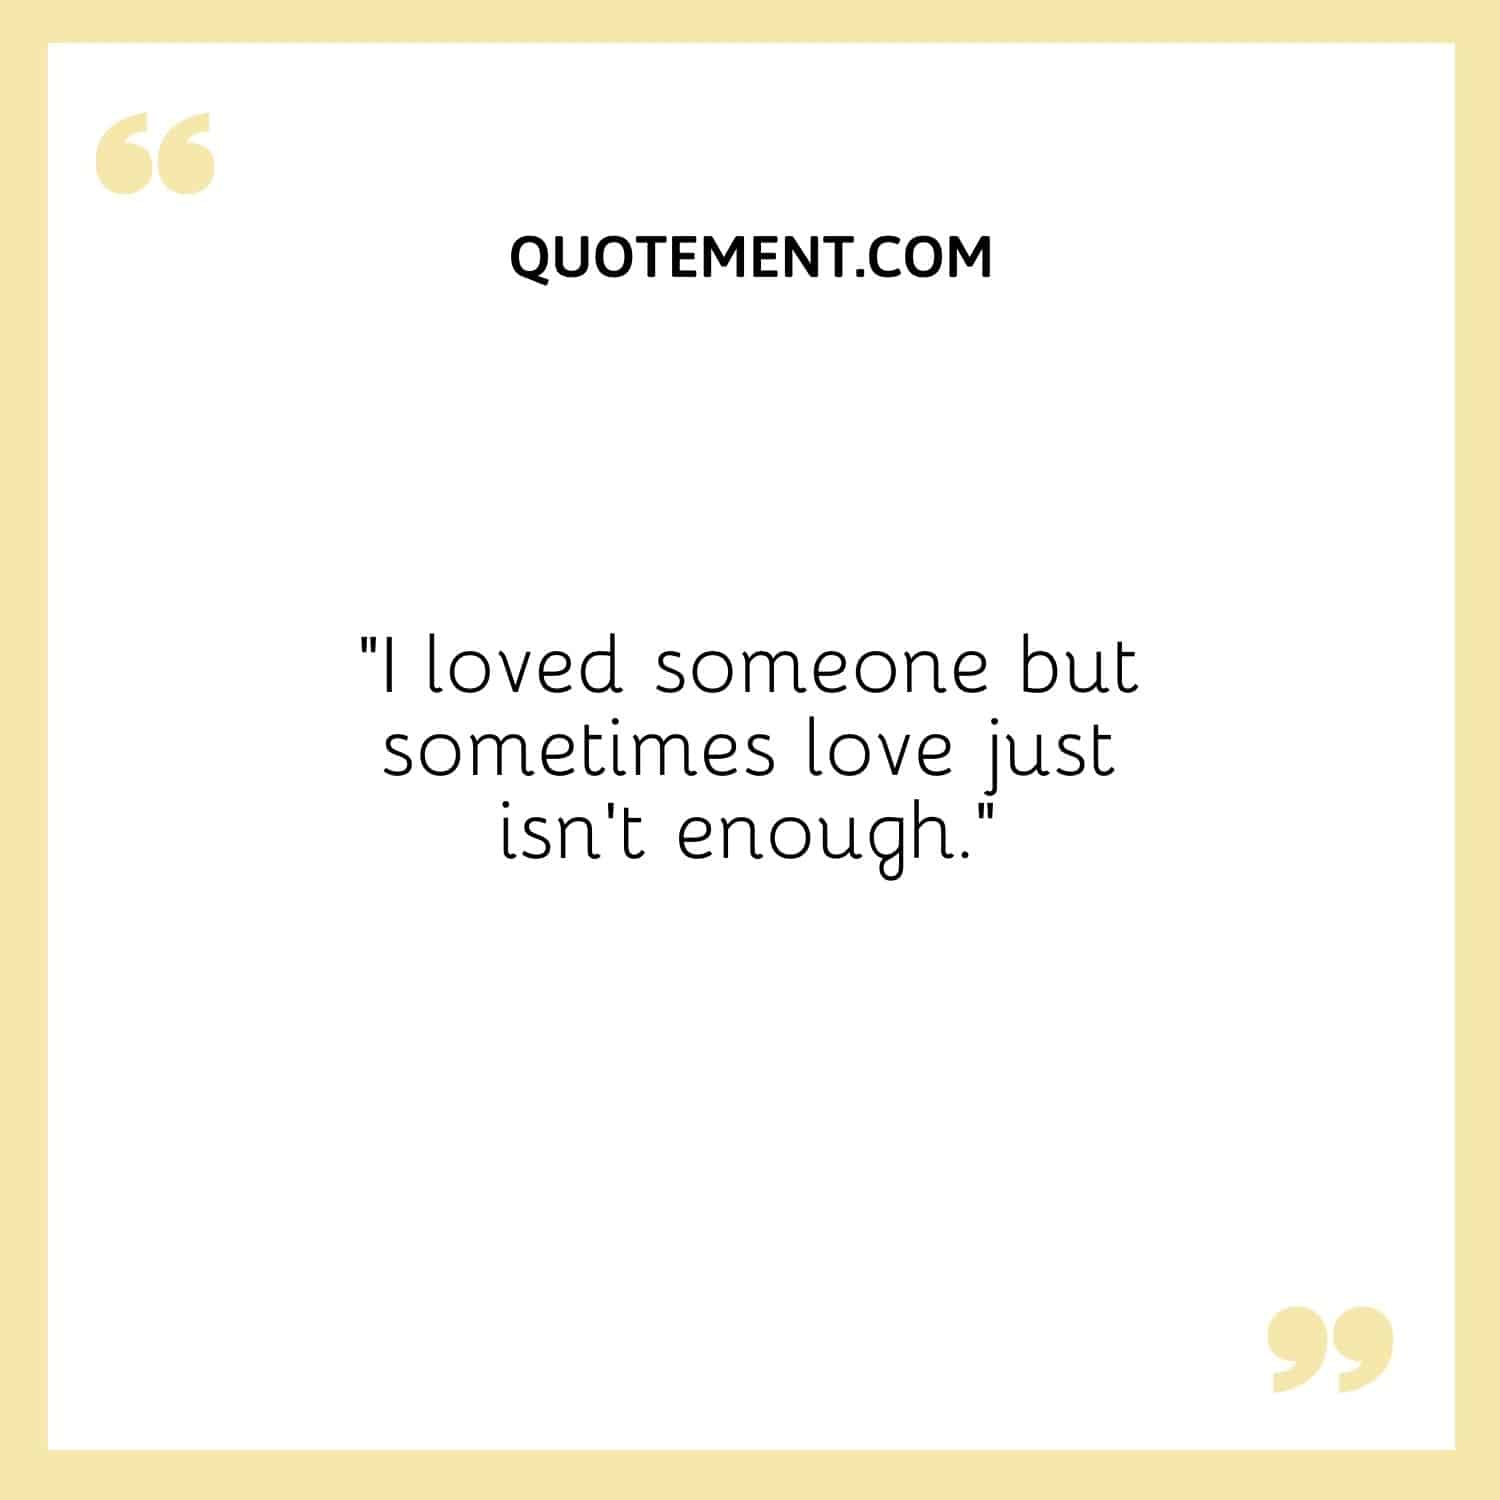 I loved someone but sometimes love just isn’t enough